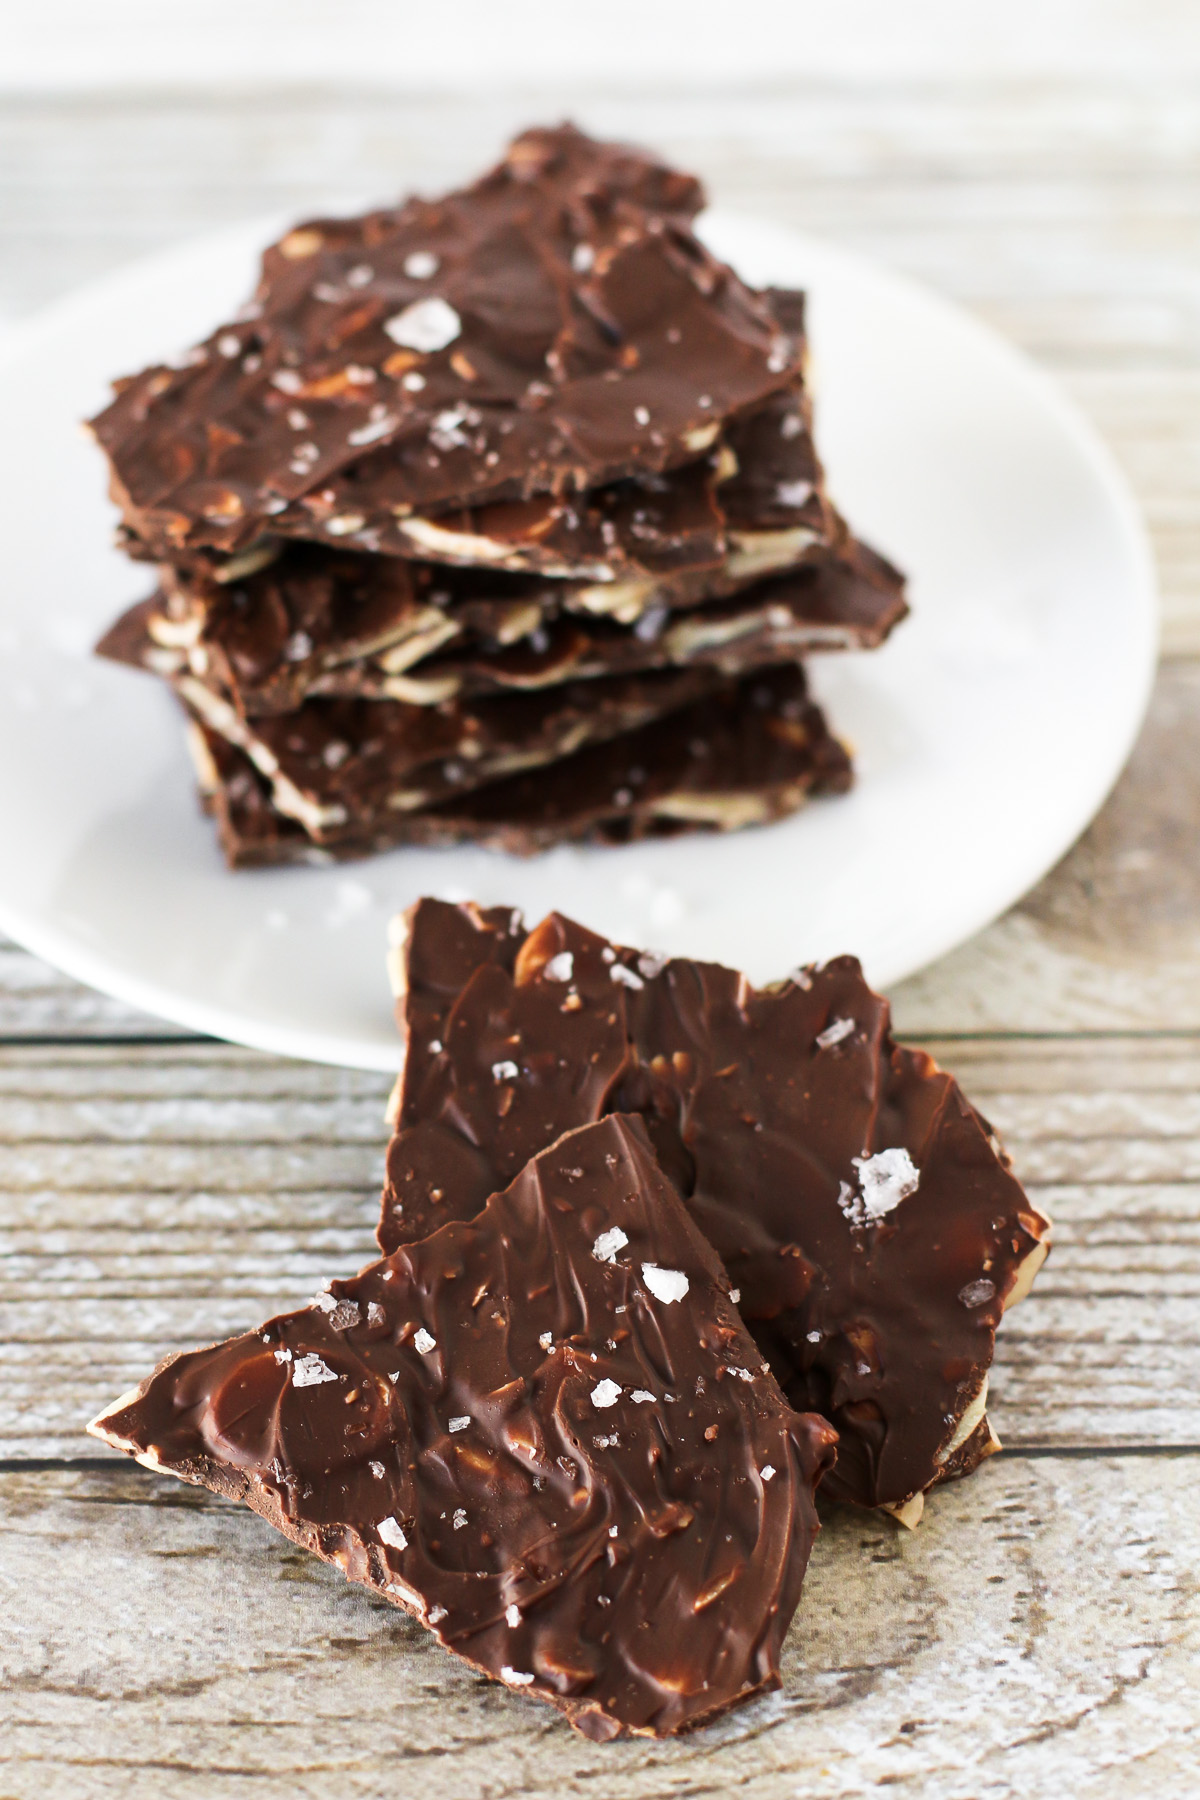 Sea Salt Chocolate Almond Bark. Thin layer of toasted sliced almonds, coated in chocolate and sprinkled with flaked sea salt. 